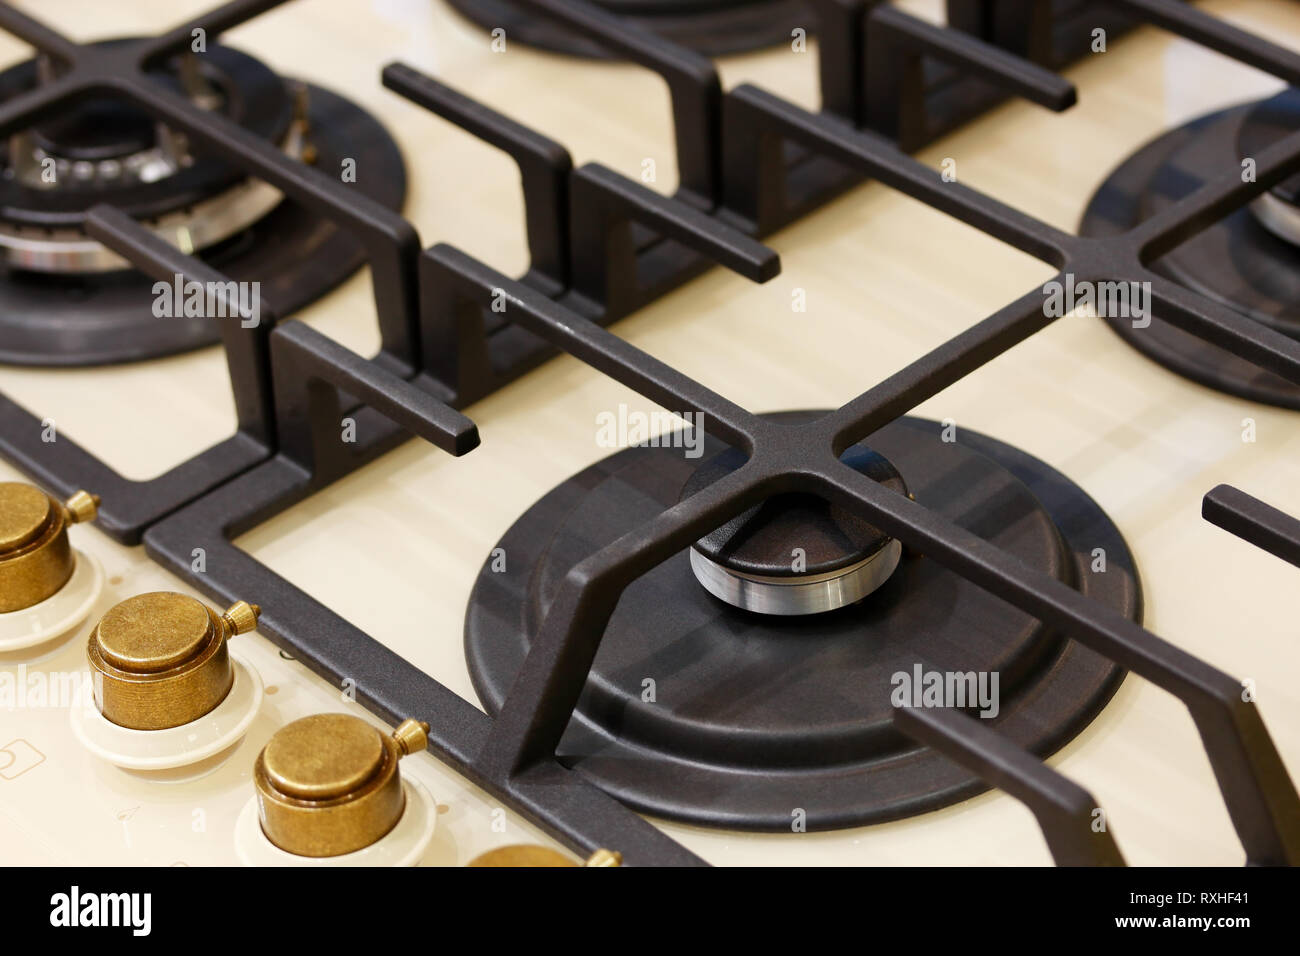 Classic four burner gas stove with brass knobs. Selective focus. Stock Photo